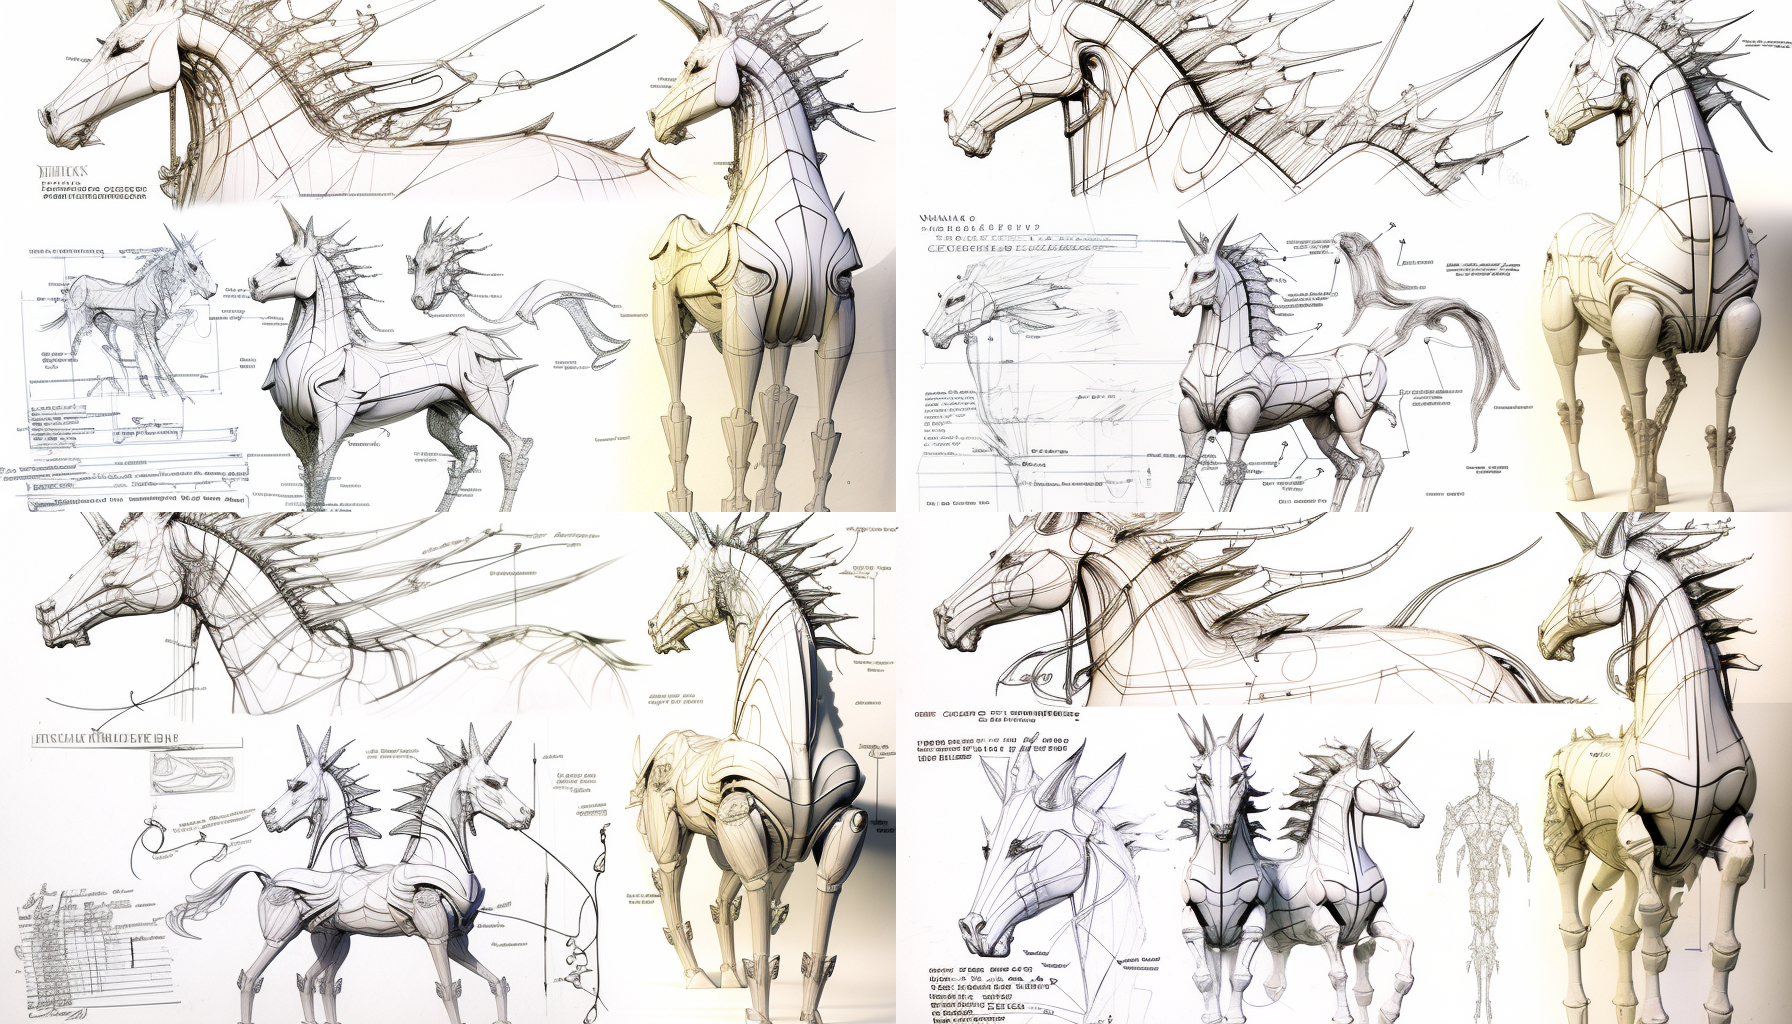 66yyyh_Sinosaurus_horseJourney_to_the_Westconcept_design_sheetw_61325367-57b3-4f.png